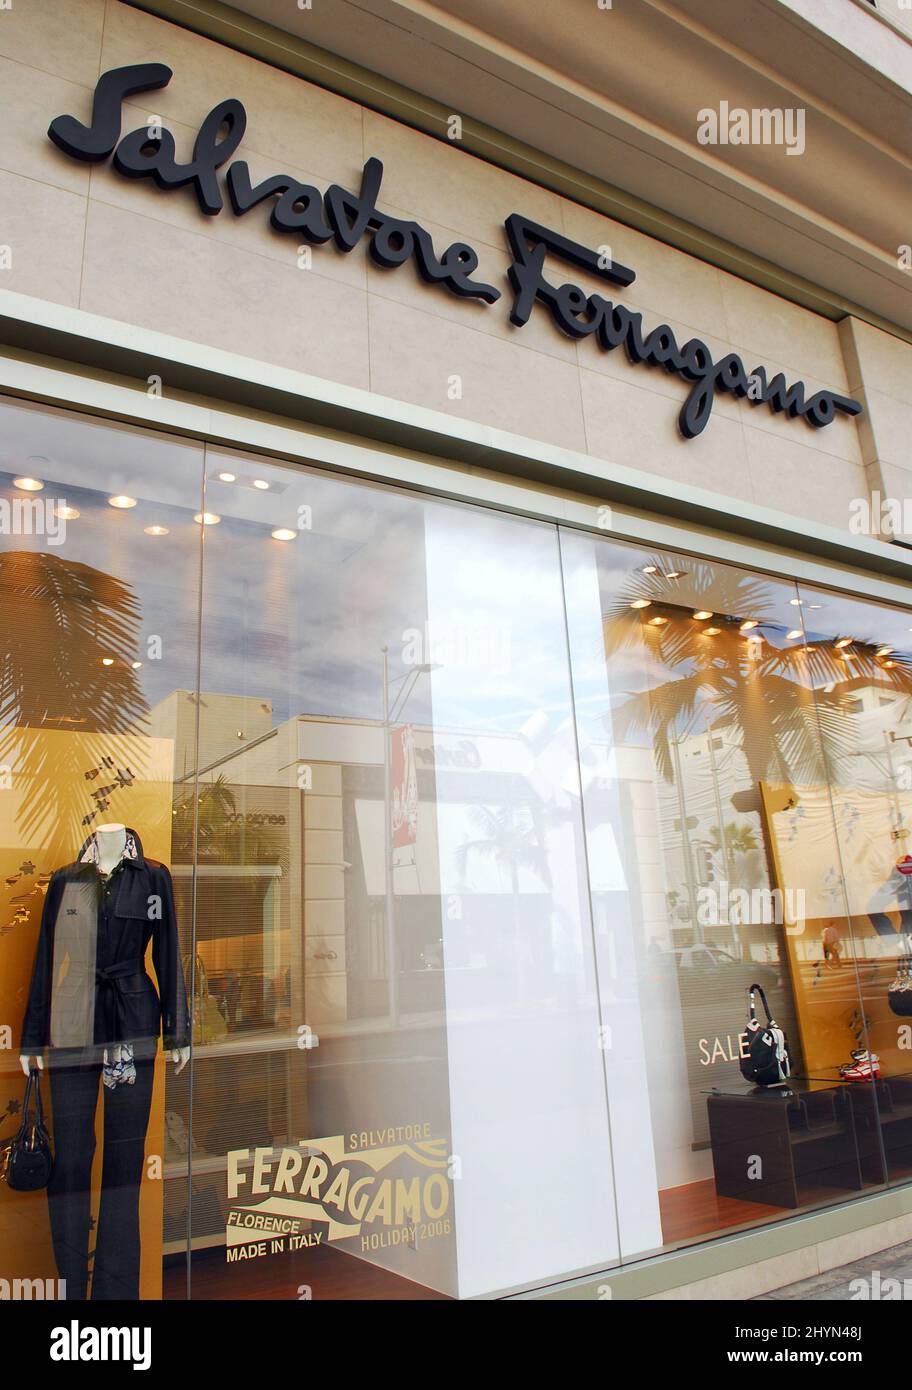 Salvatore ferragamo rodeo drive hi-res stock photography and images - Alamy